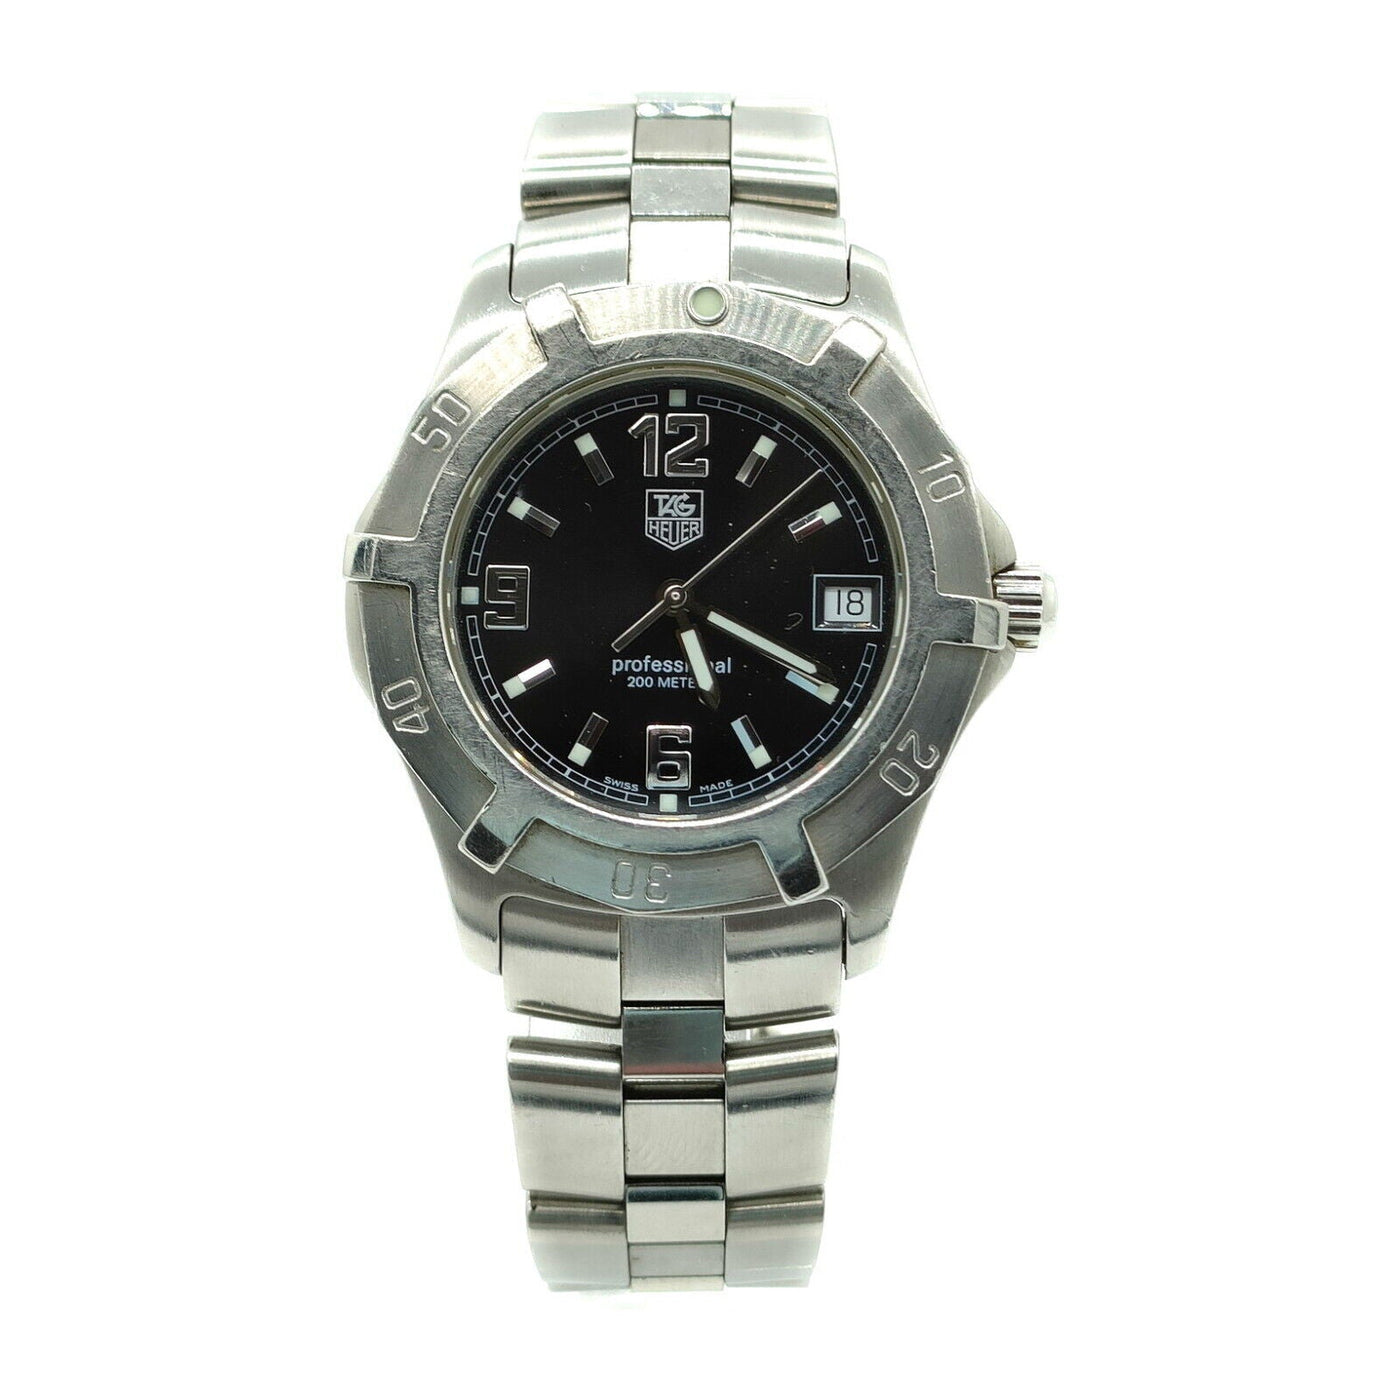 Tag Heuer WN1110 Exclusive Professional 200m Watch - Luxury Cheaper